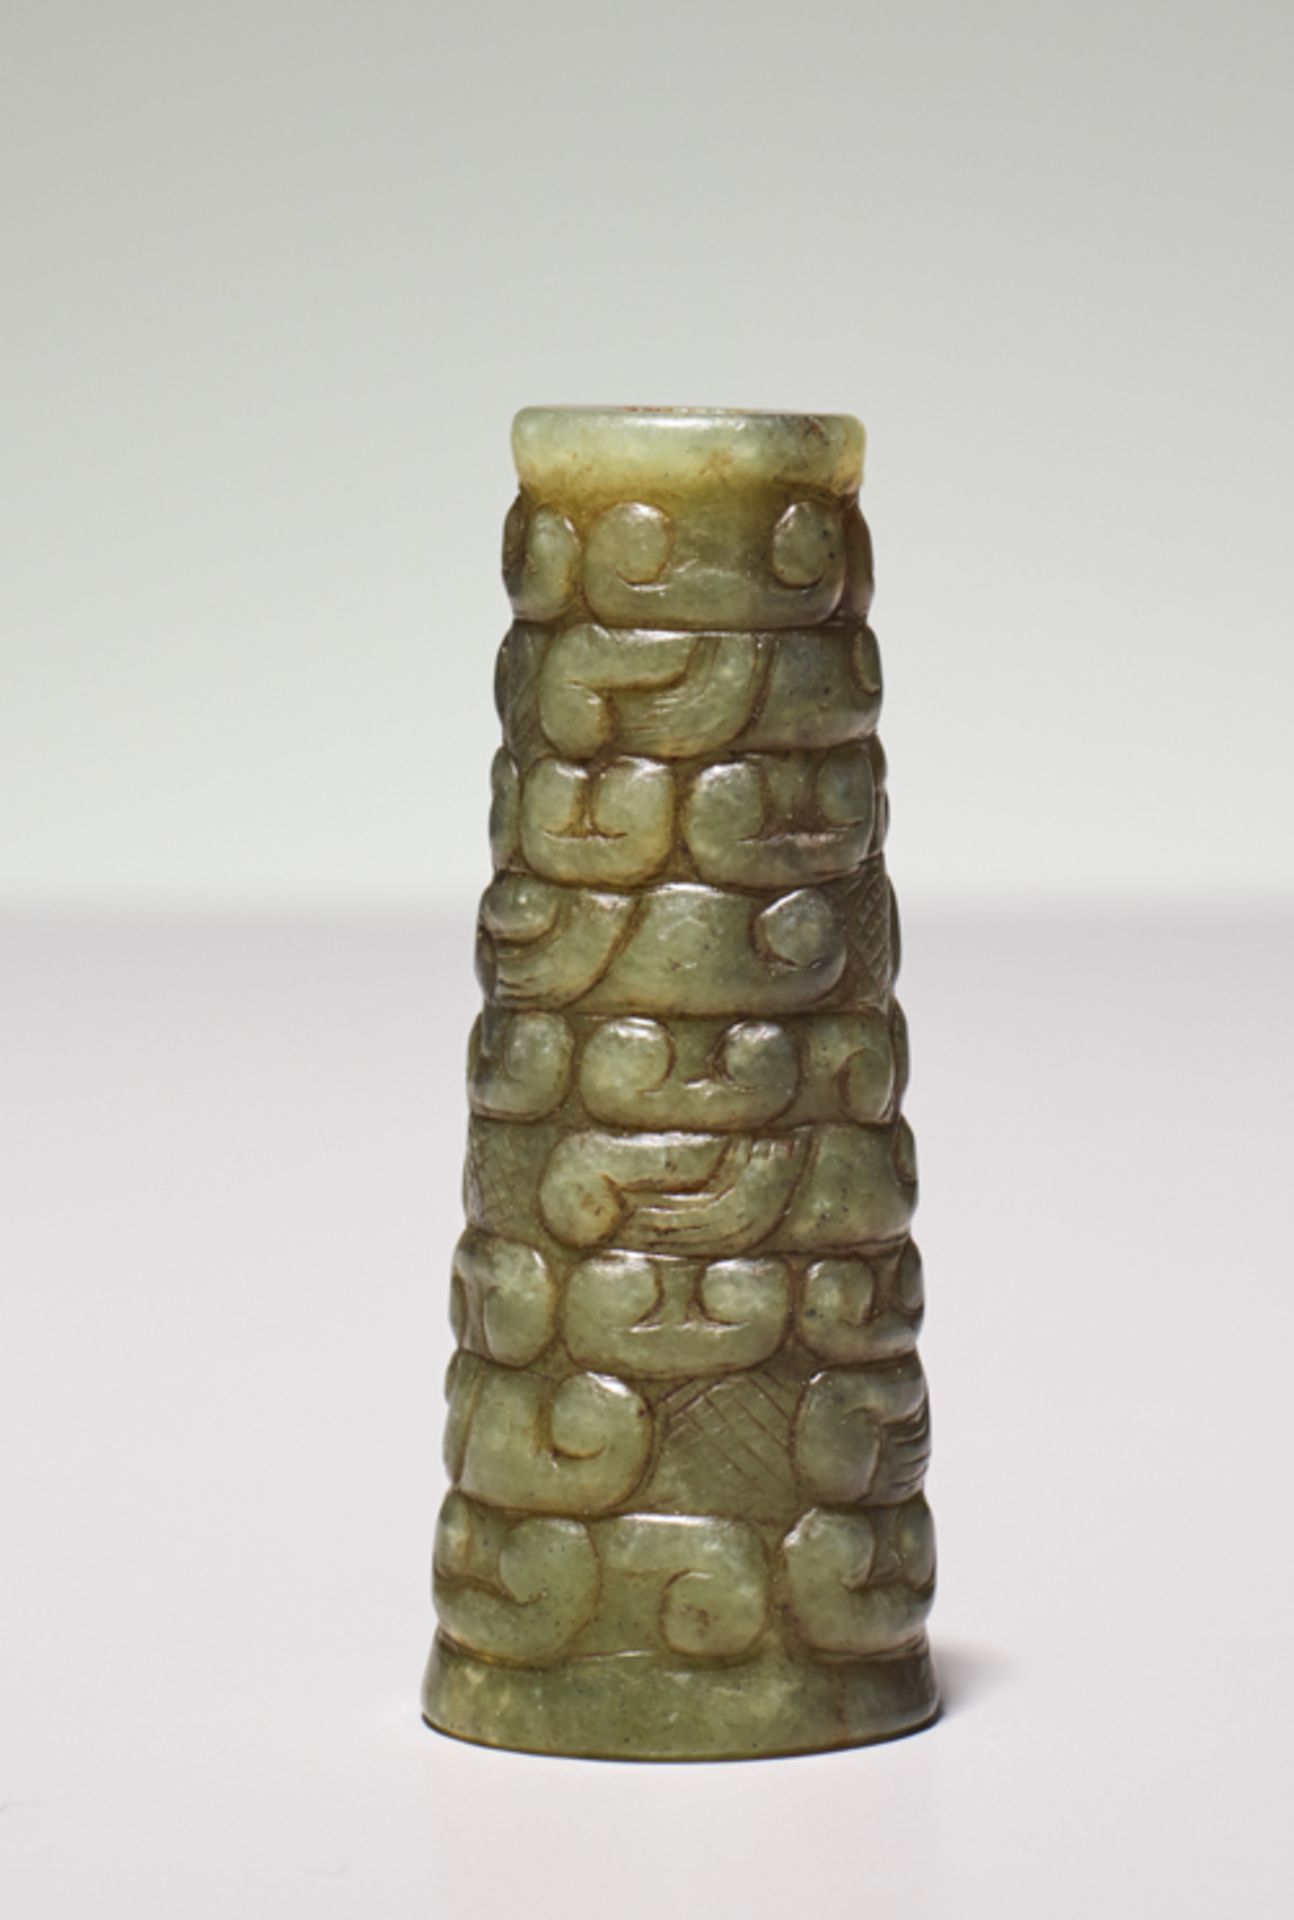 CONICAL BEADJade. China, Eastern Zhou, 5th century BCDuring the Eastern Zhou period, beads like this - Image 3 of 6